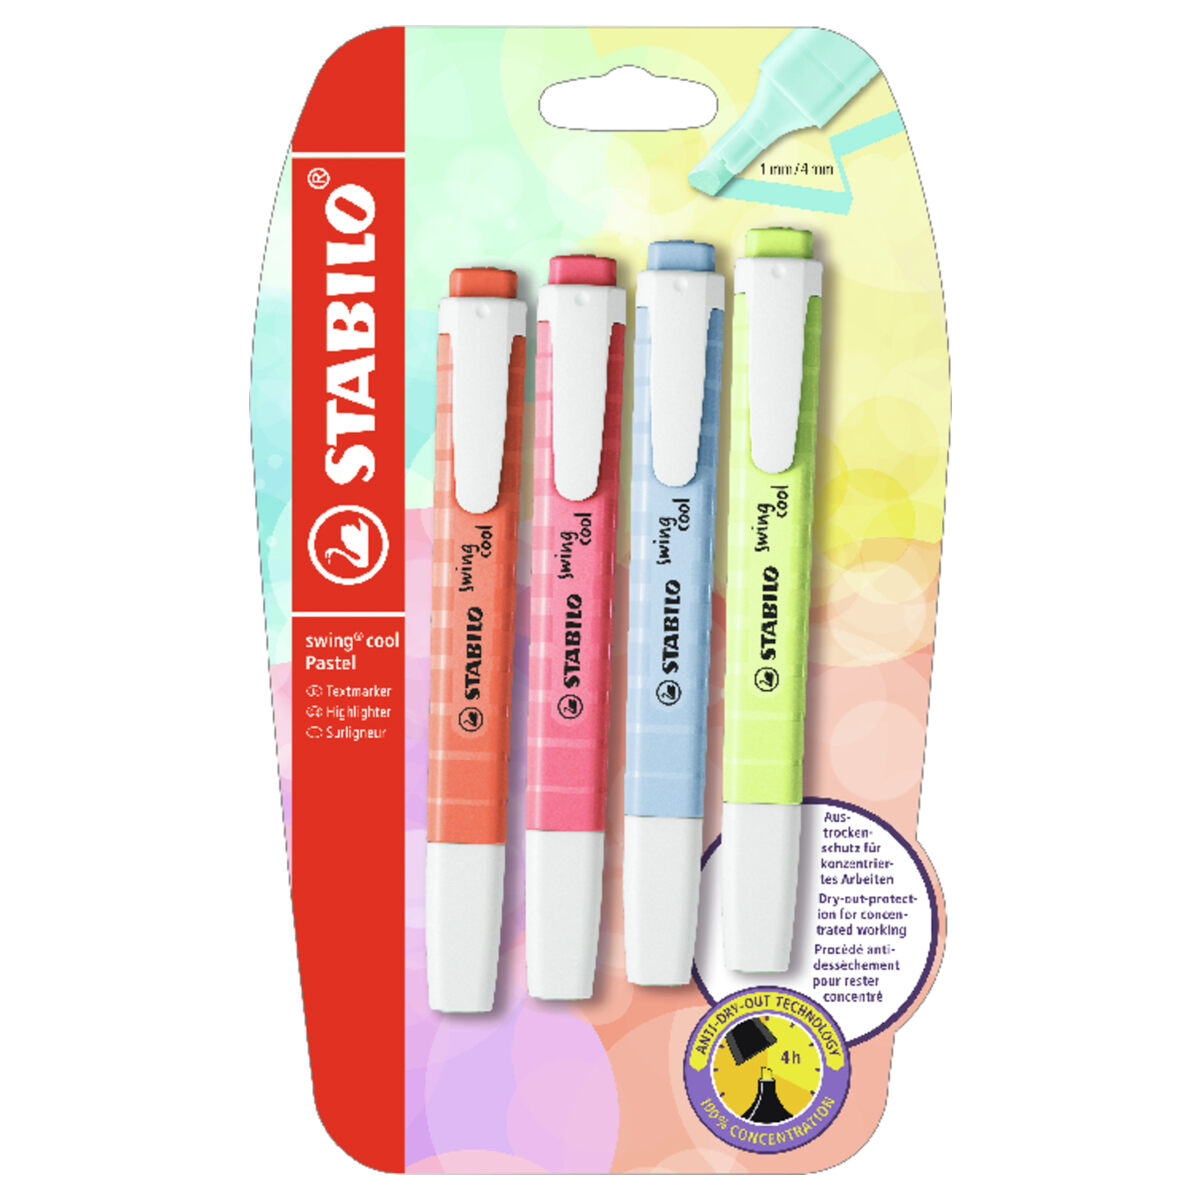 Highlighter - STABILO swing cool Pastel - Pack of 6 - Assorted Colours  4006381527408